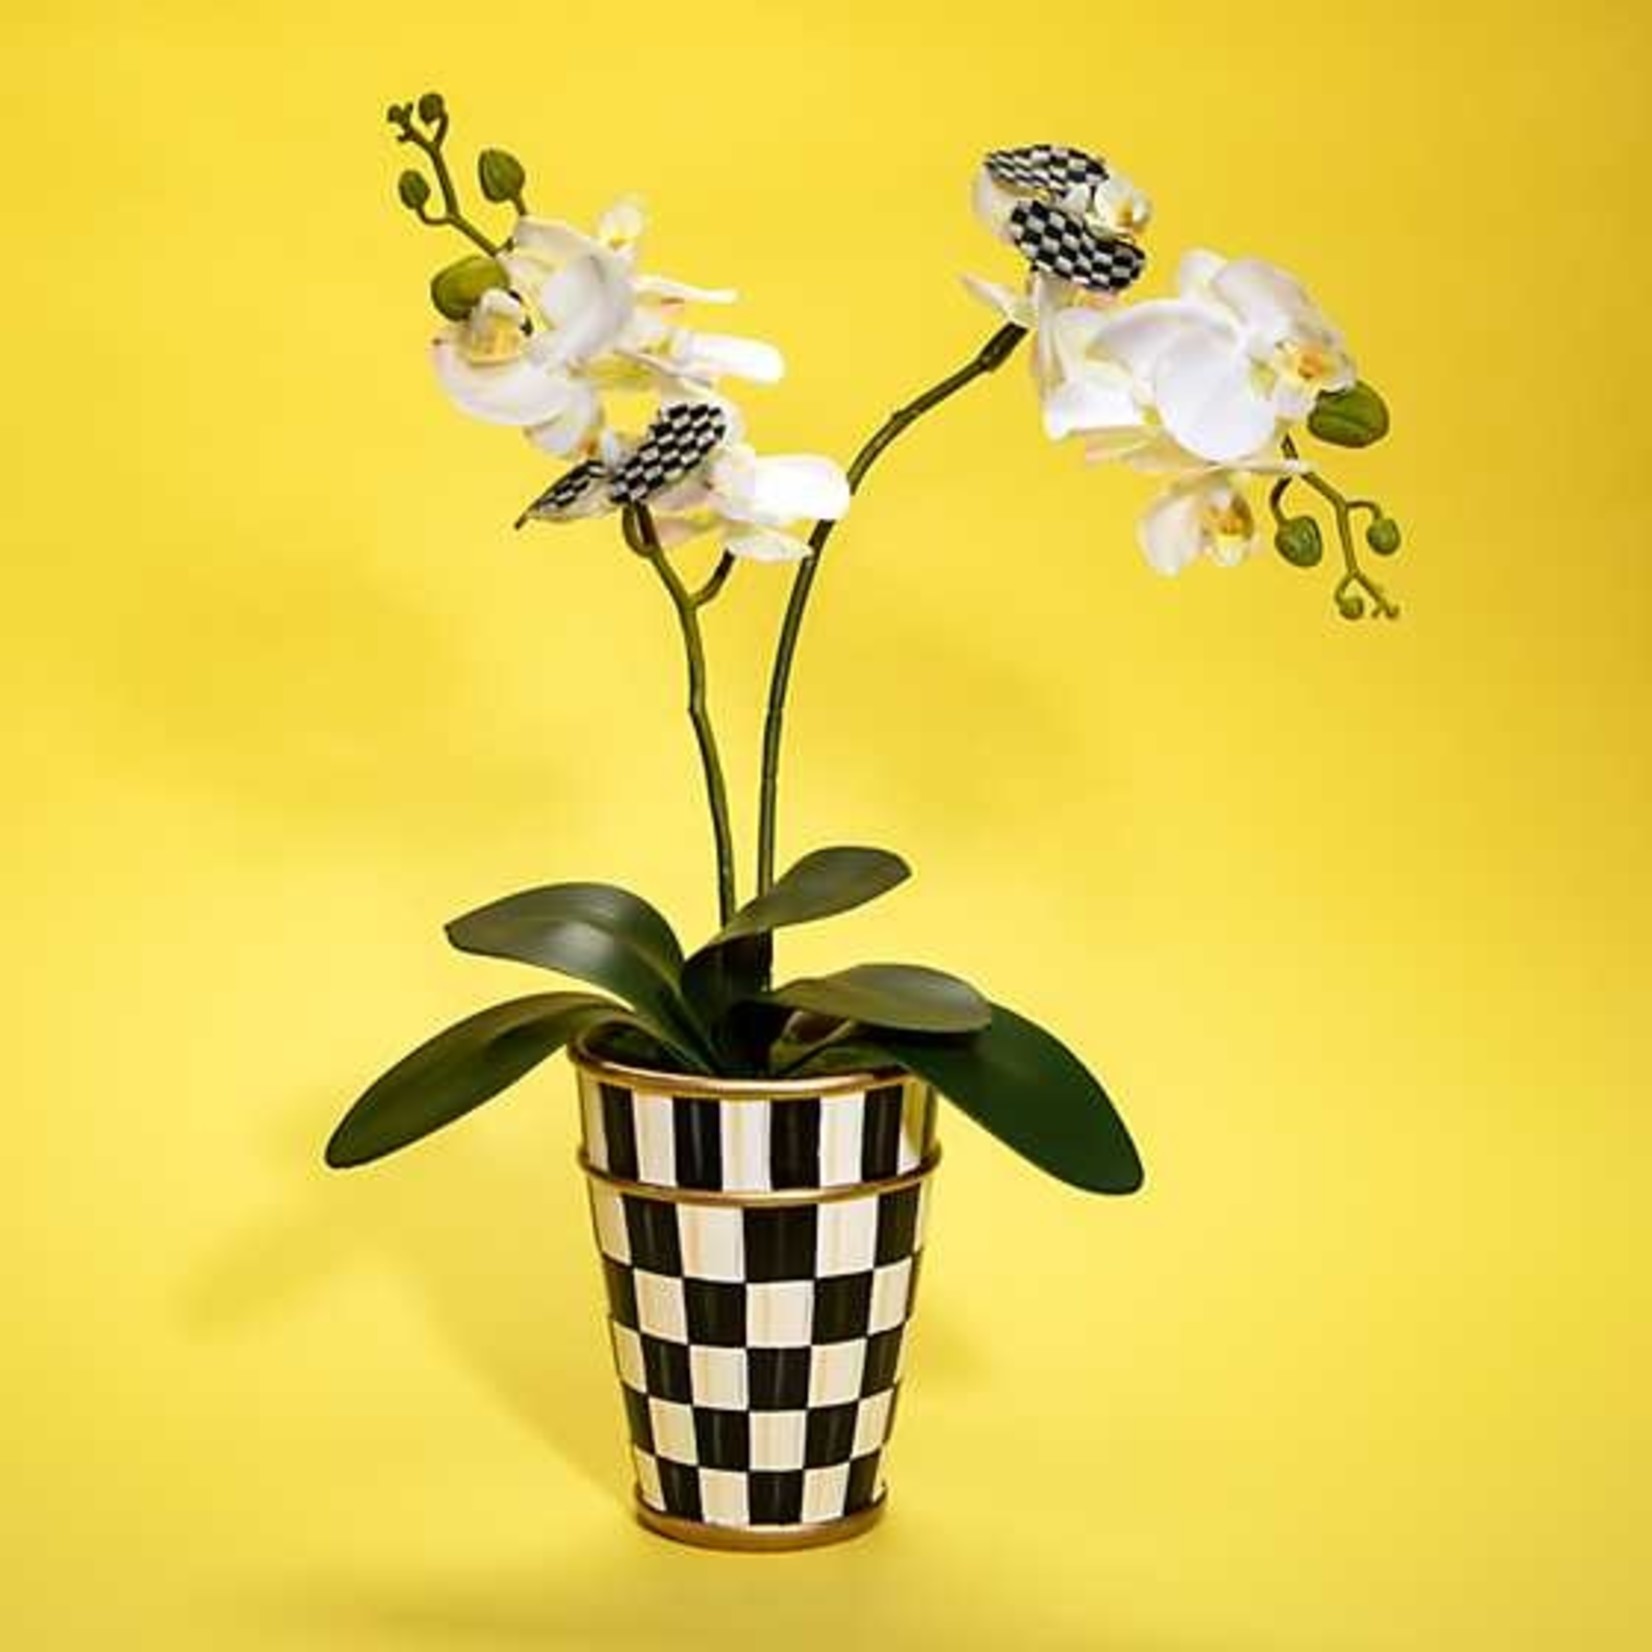 MacKenzie-Childs Potted Orchid